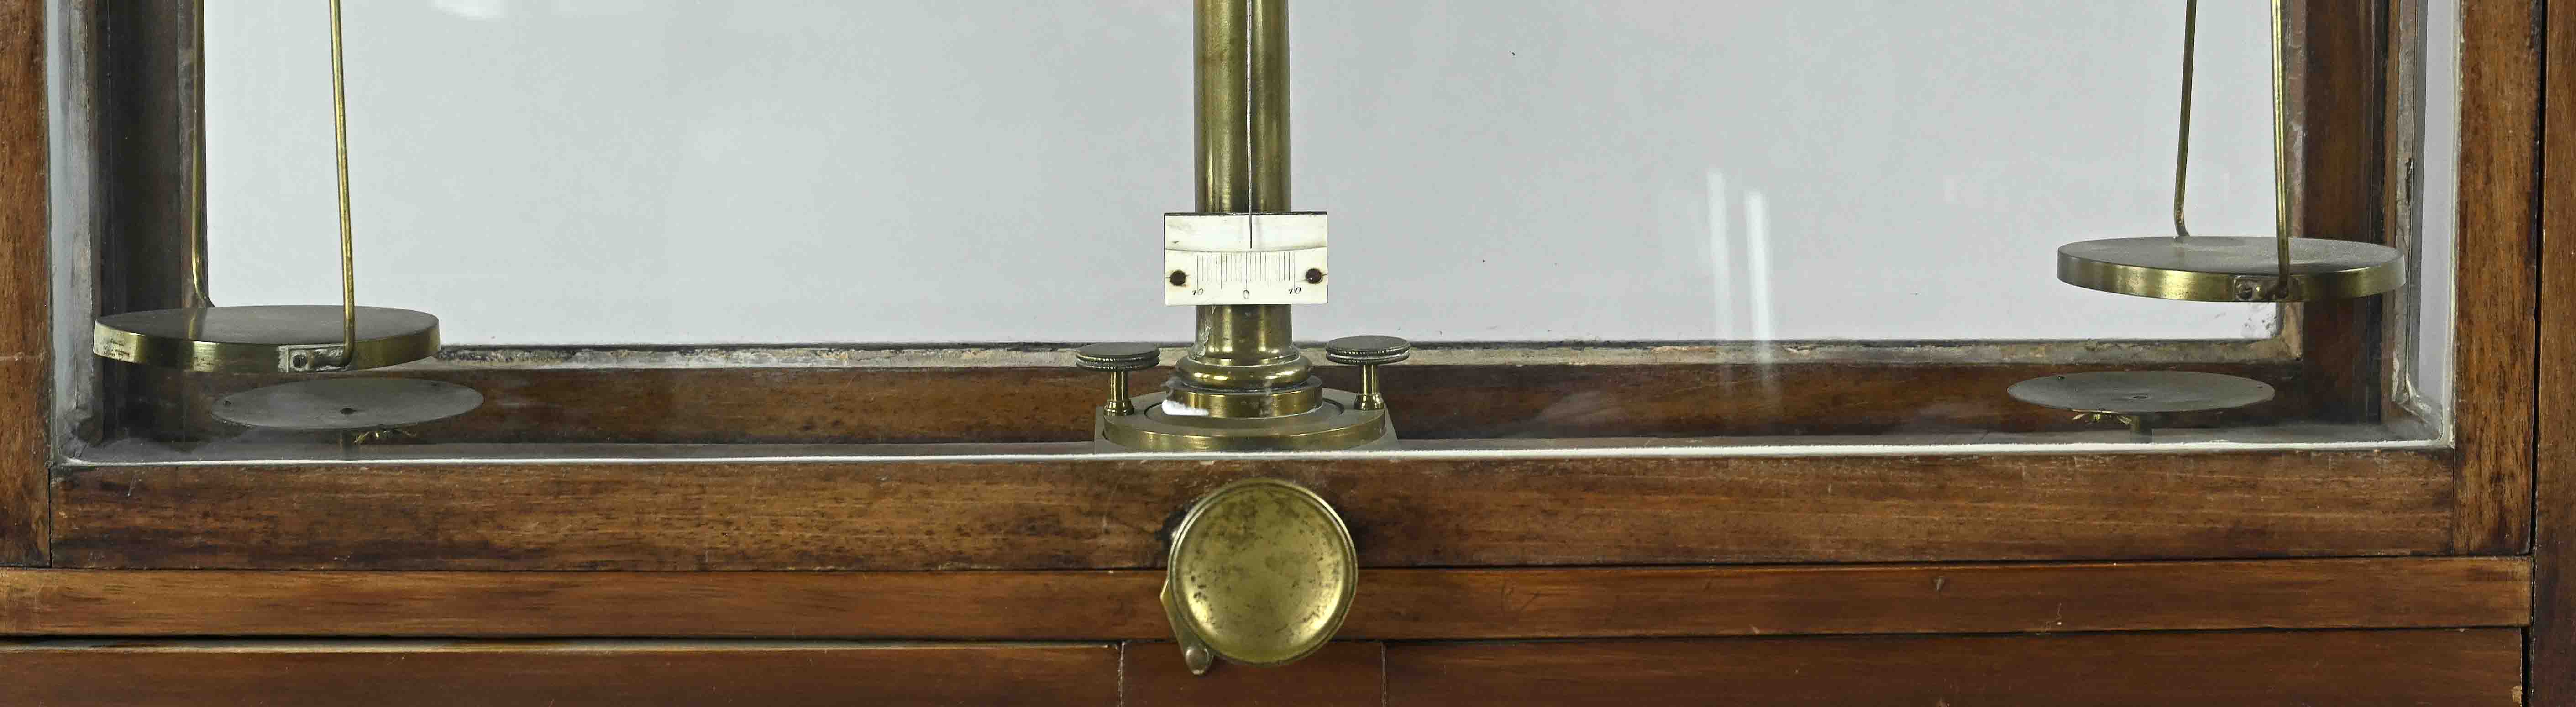 Precision balance, German, 2nd half of the 19th century, wood with glass case, height 48.5 x 60 x 1 - Image 2 of 3